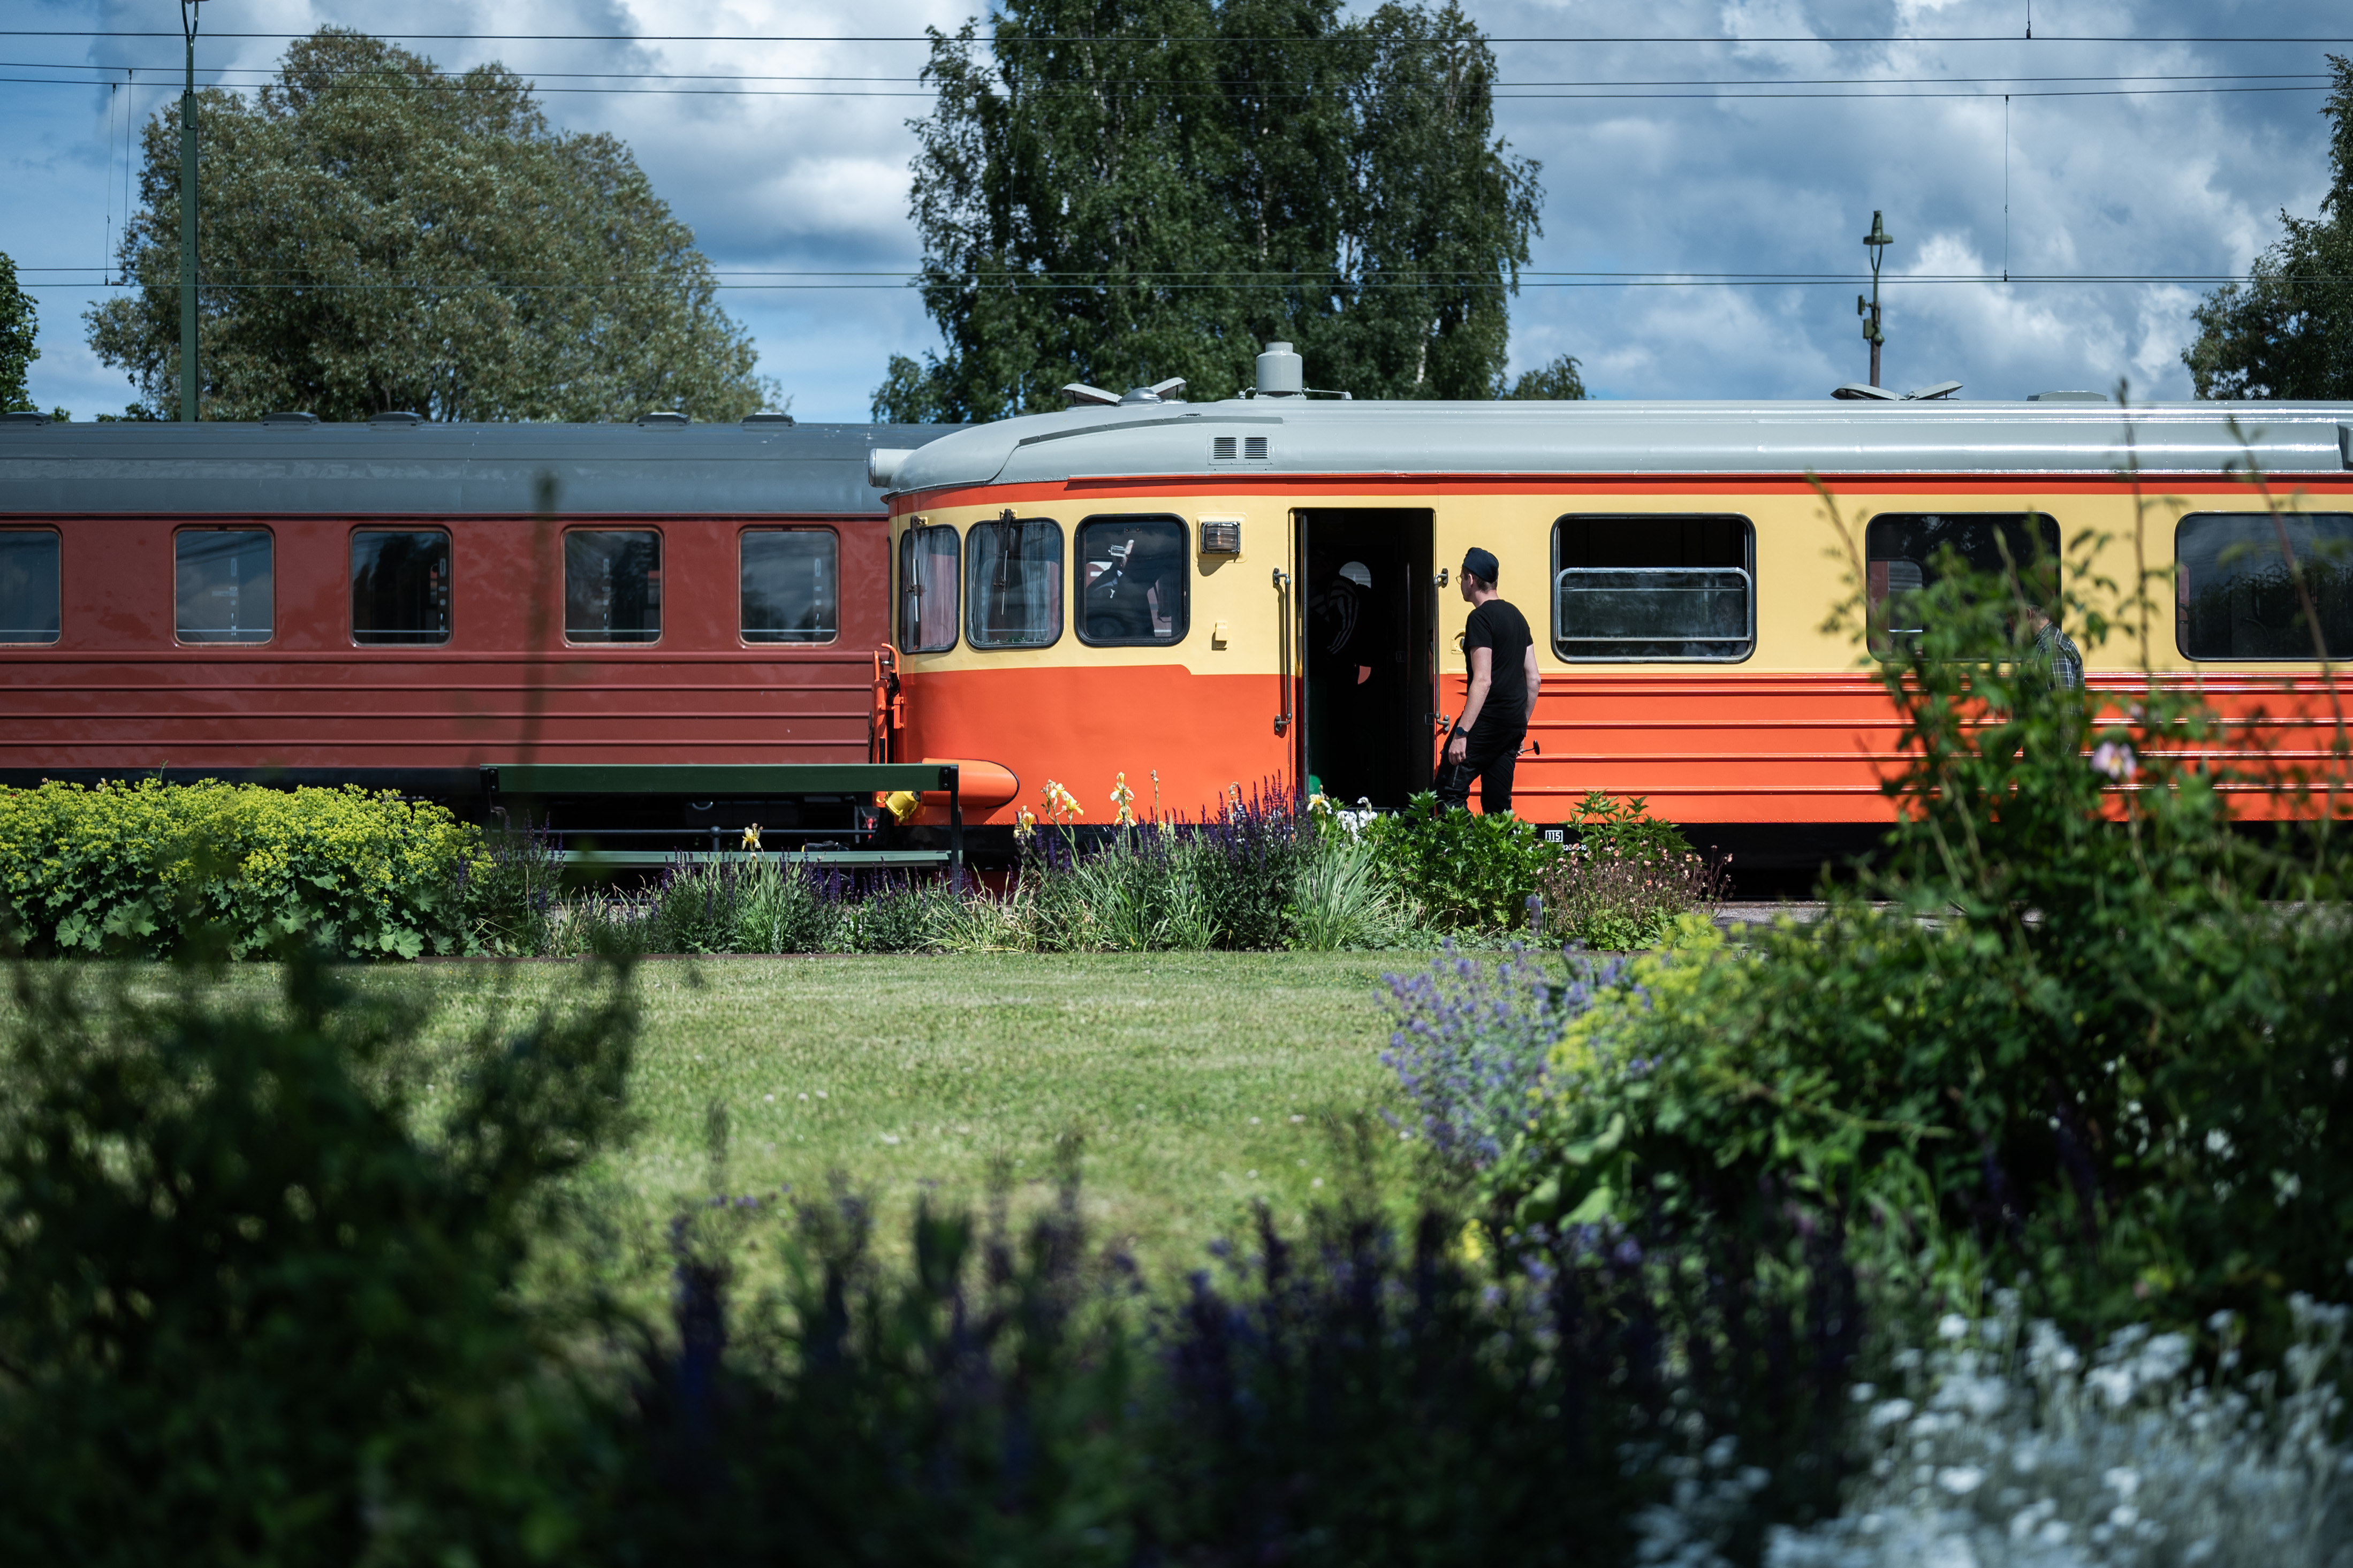 A railcar is visible among green grass and bushes